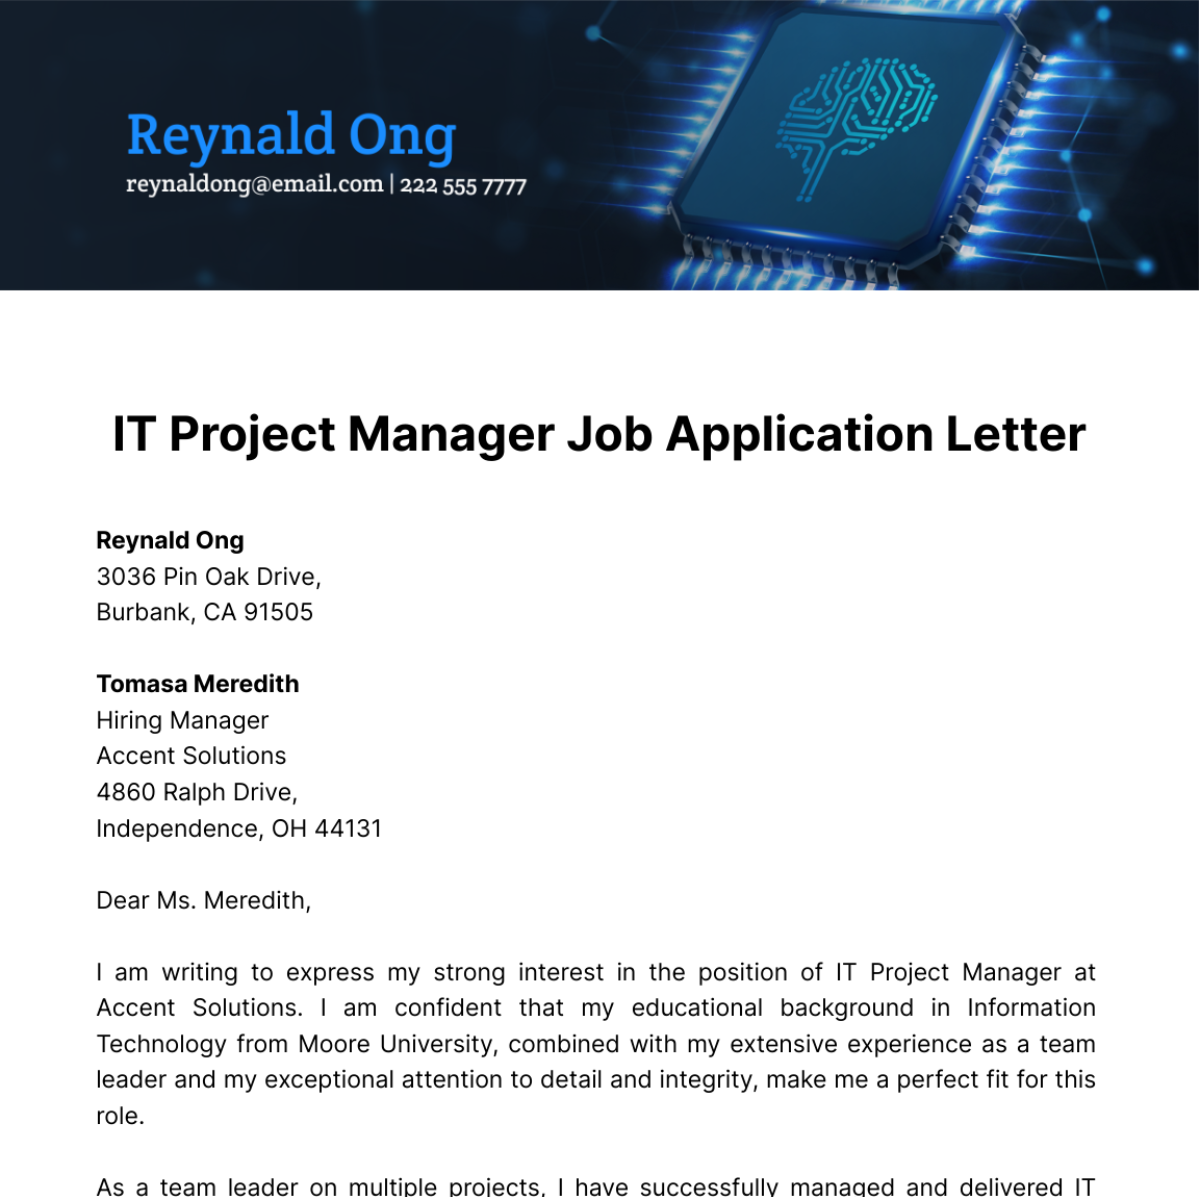 IT Project Manager Job Application Letter  Template